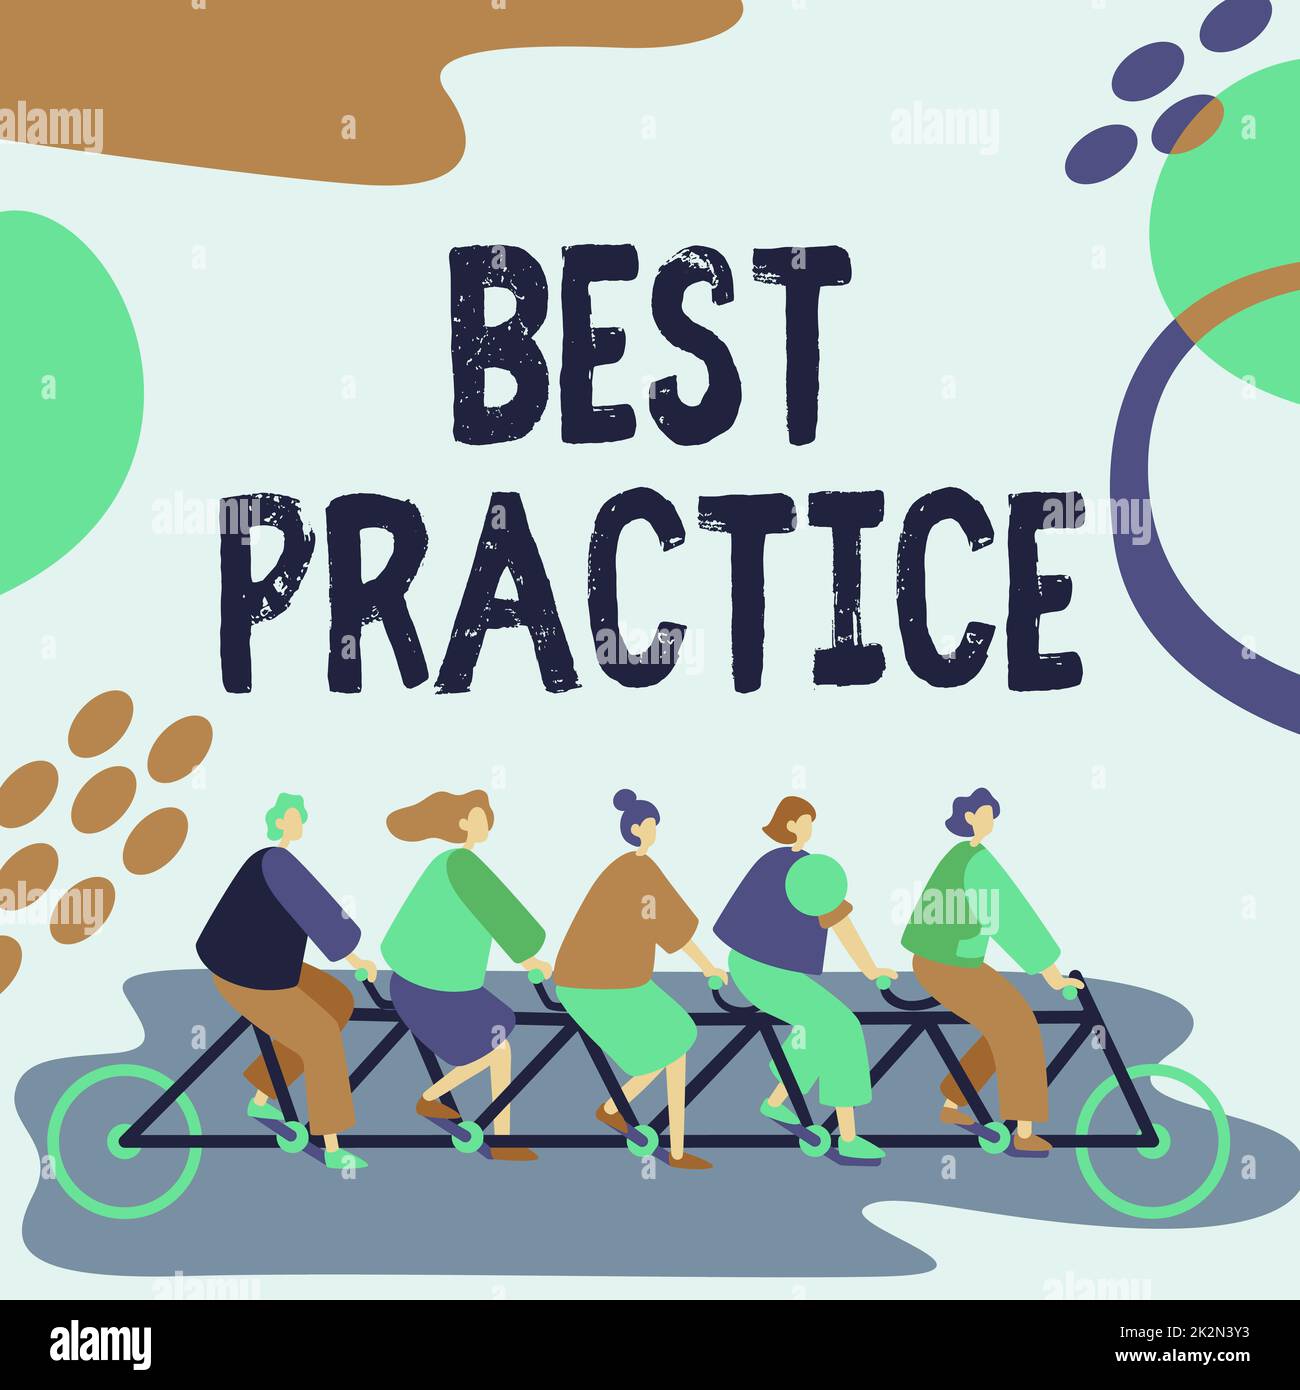 Sign displaying Best Practice. Business idea Method Systematic Touchstone Guidelines Framework Ethic Colleagues Riding Bicycle Representing Teamwork Successful Problem Solving. Stock Photo